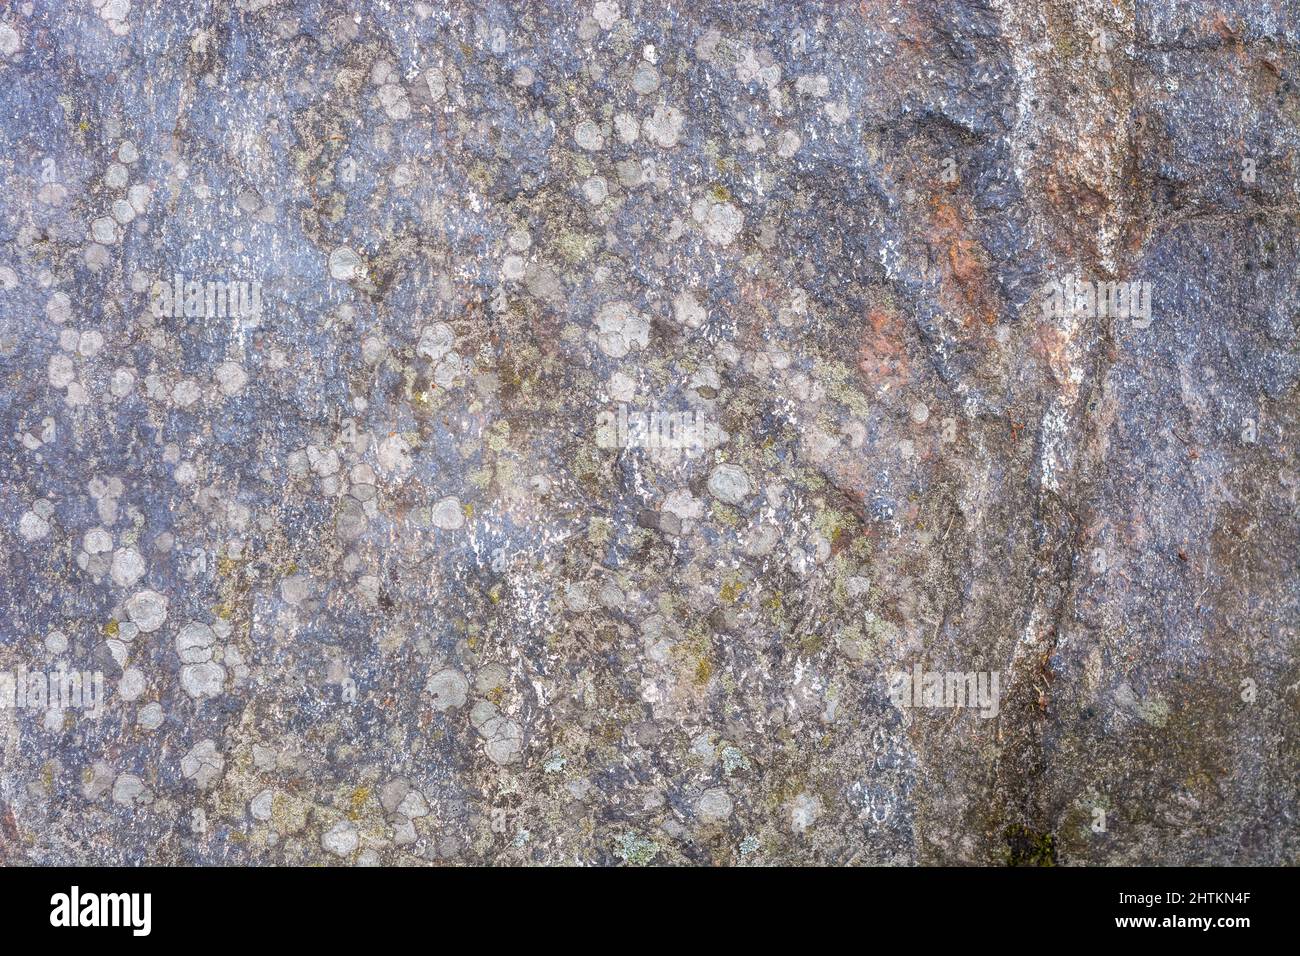 Rough rough rock surface with inclusions, for use as an abstract background and texture. Stock Photo